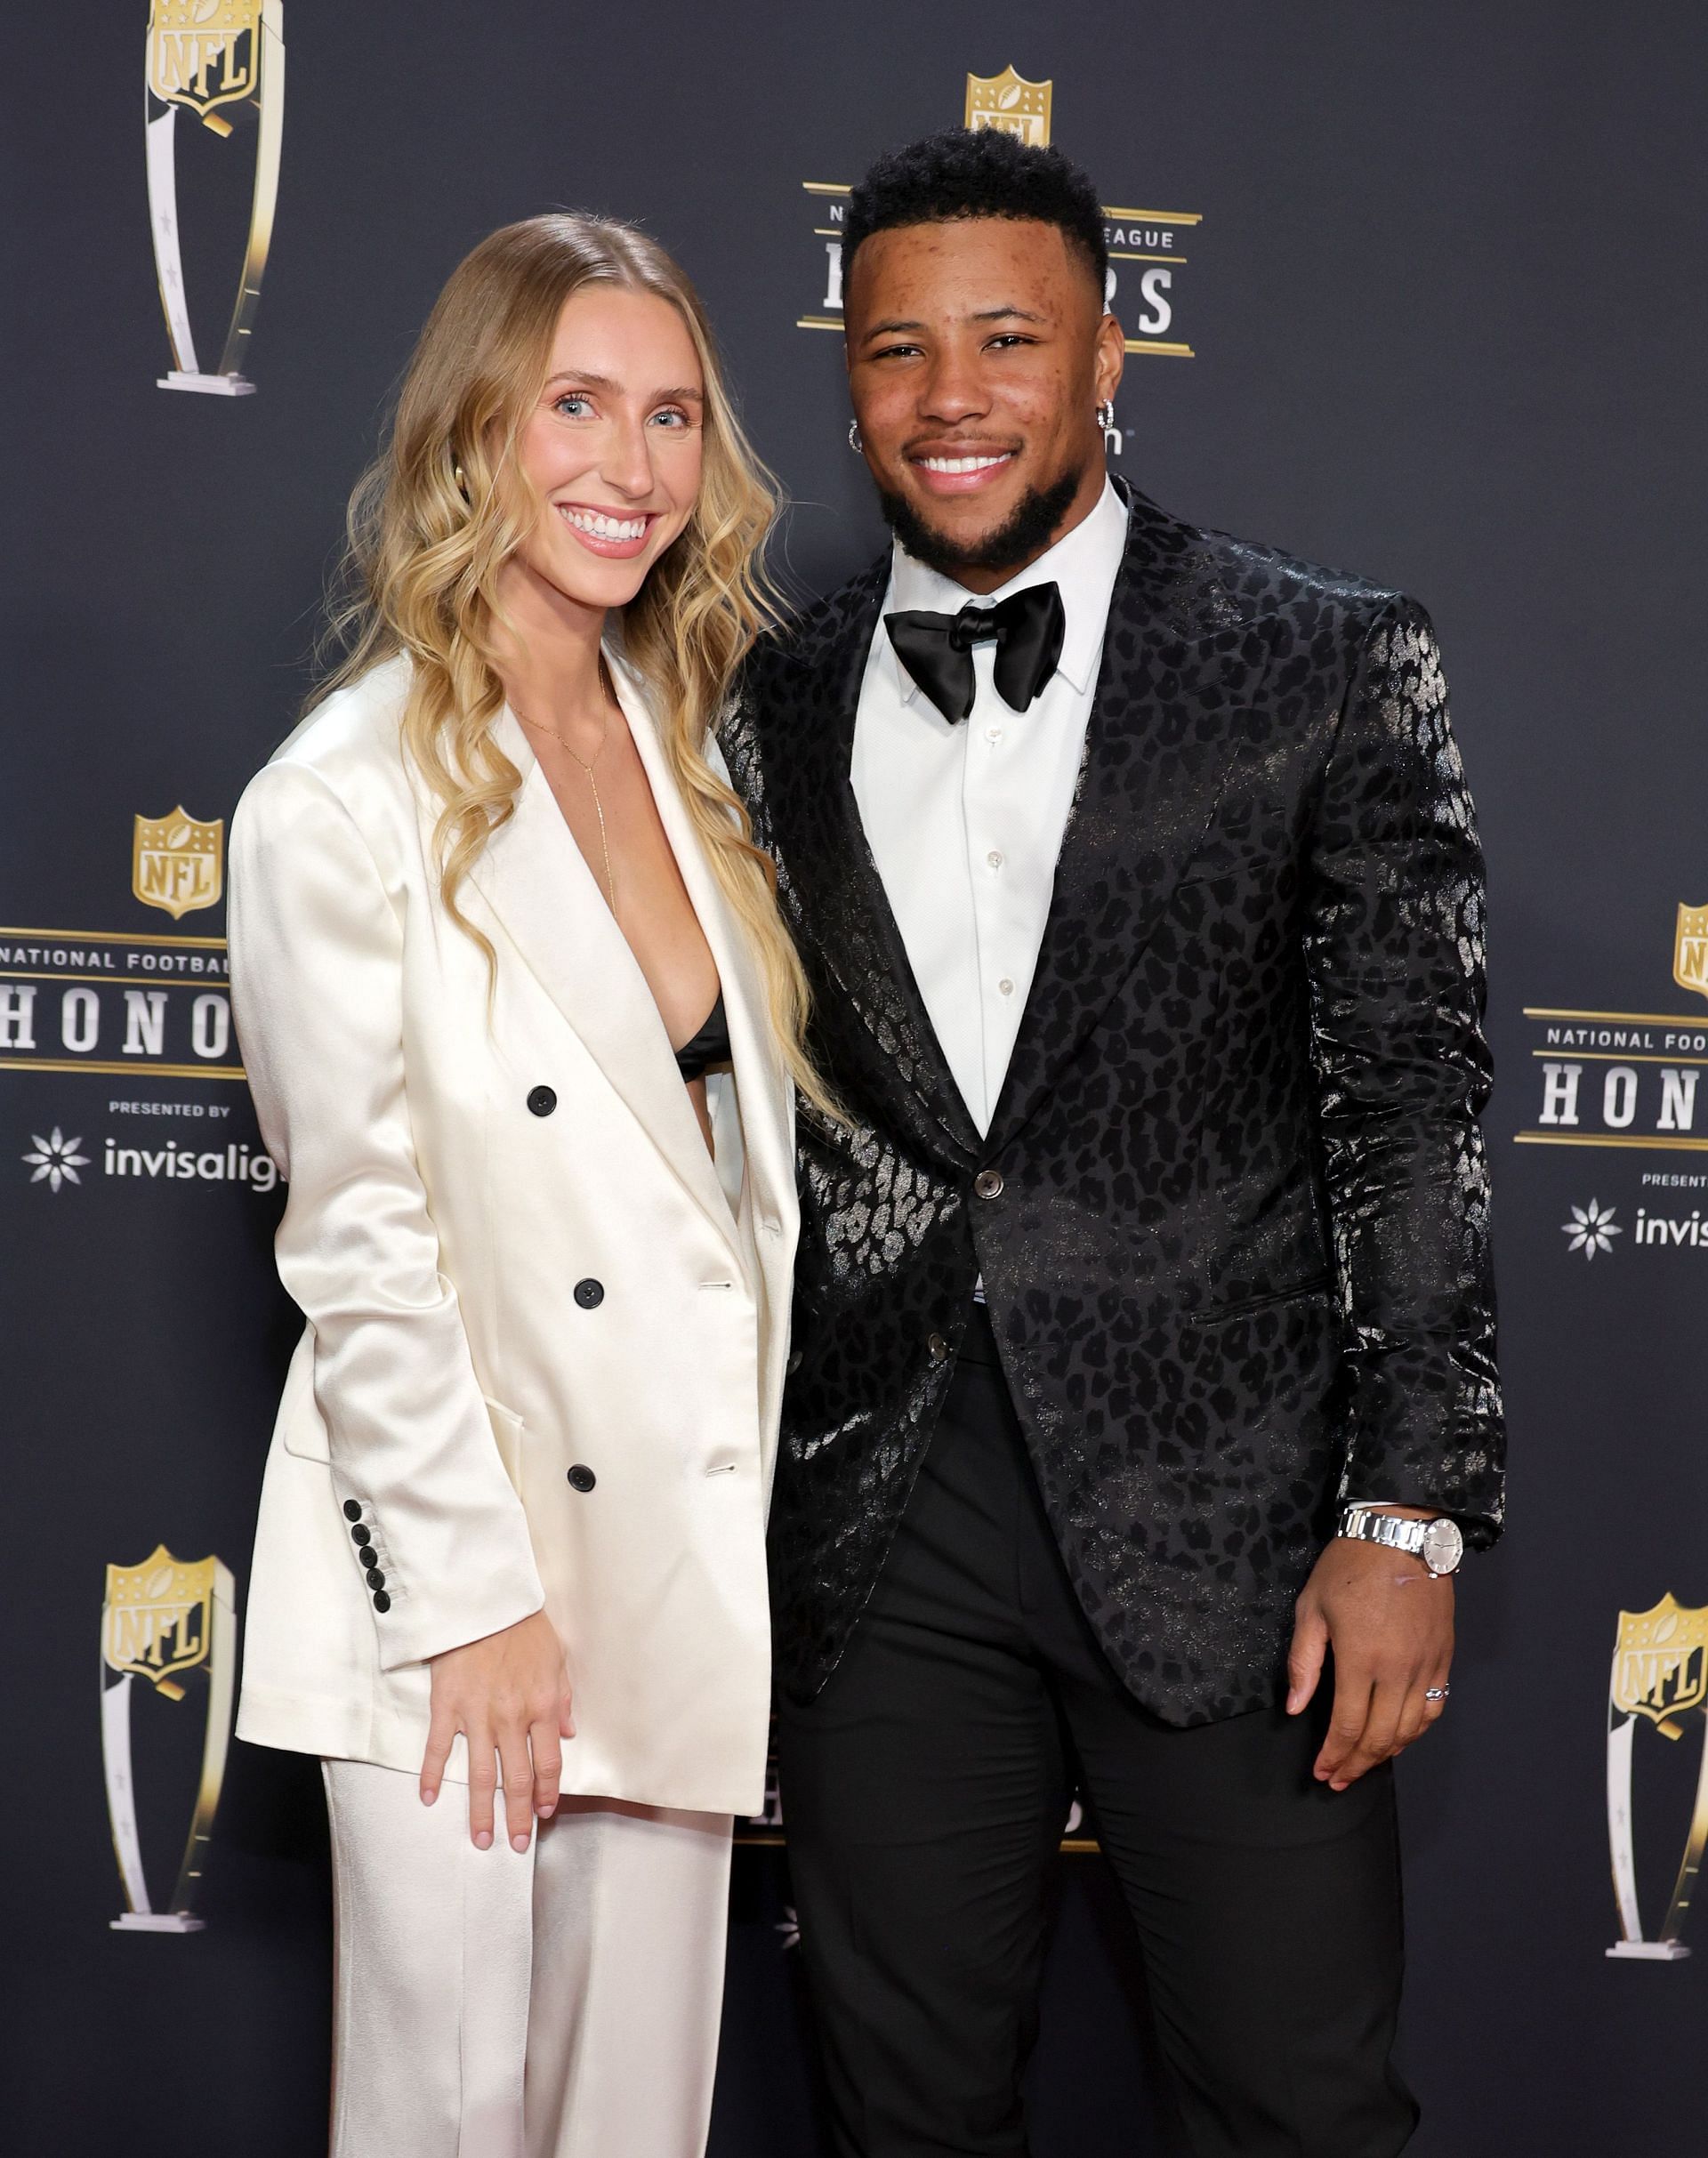 Saquon Barkley at the 12th Annual NFL Honors - Arrivals